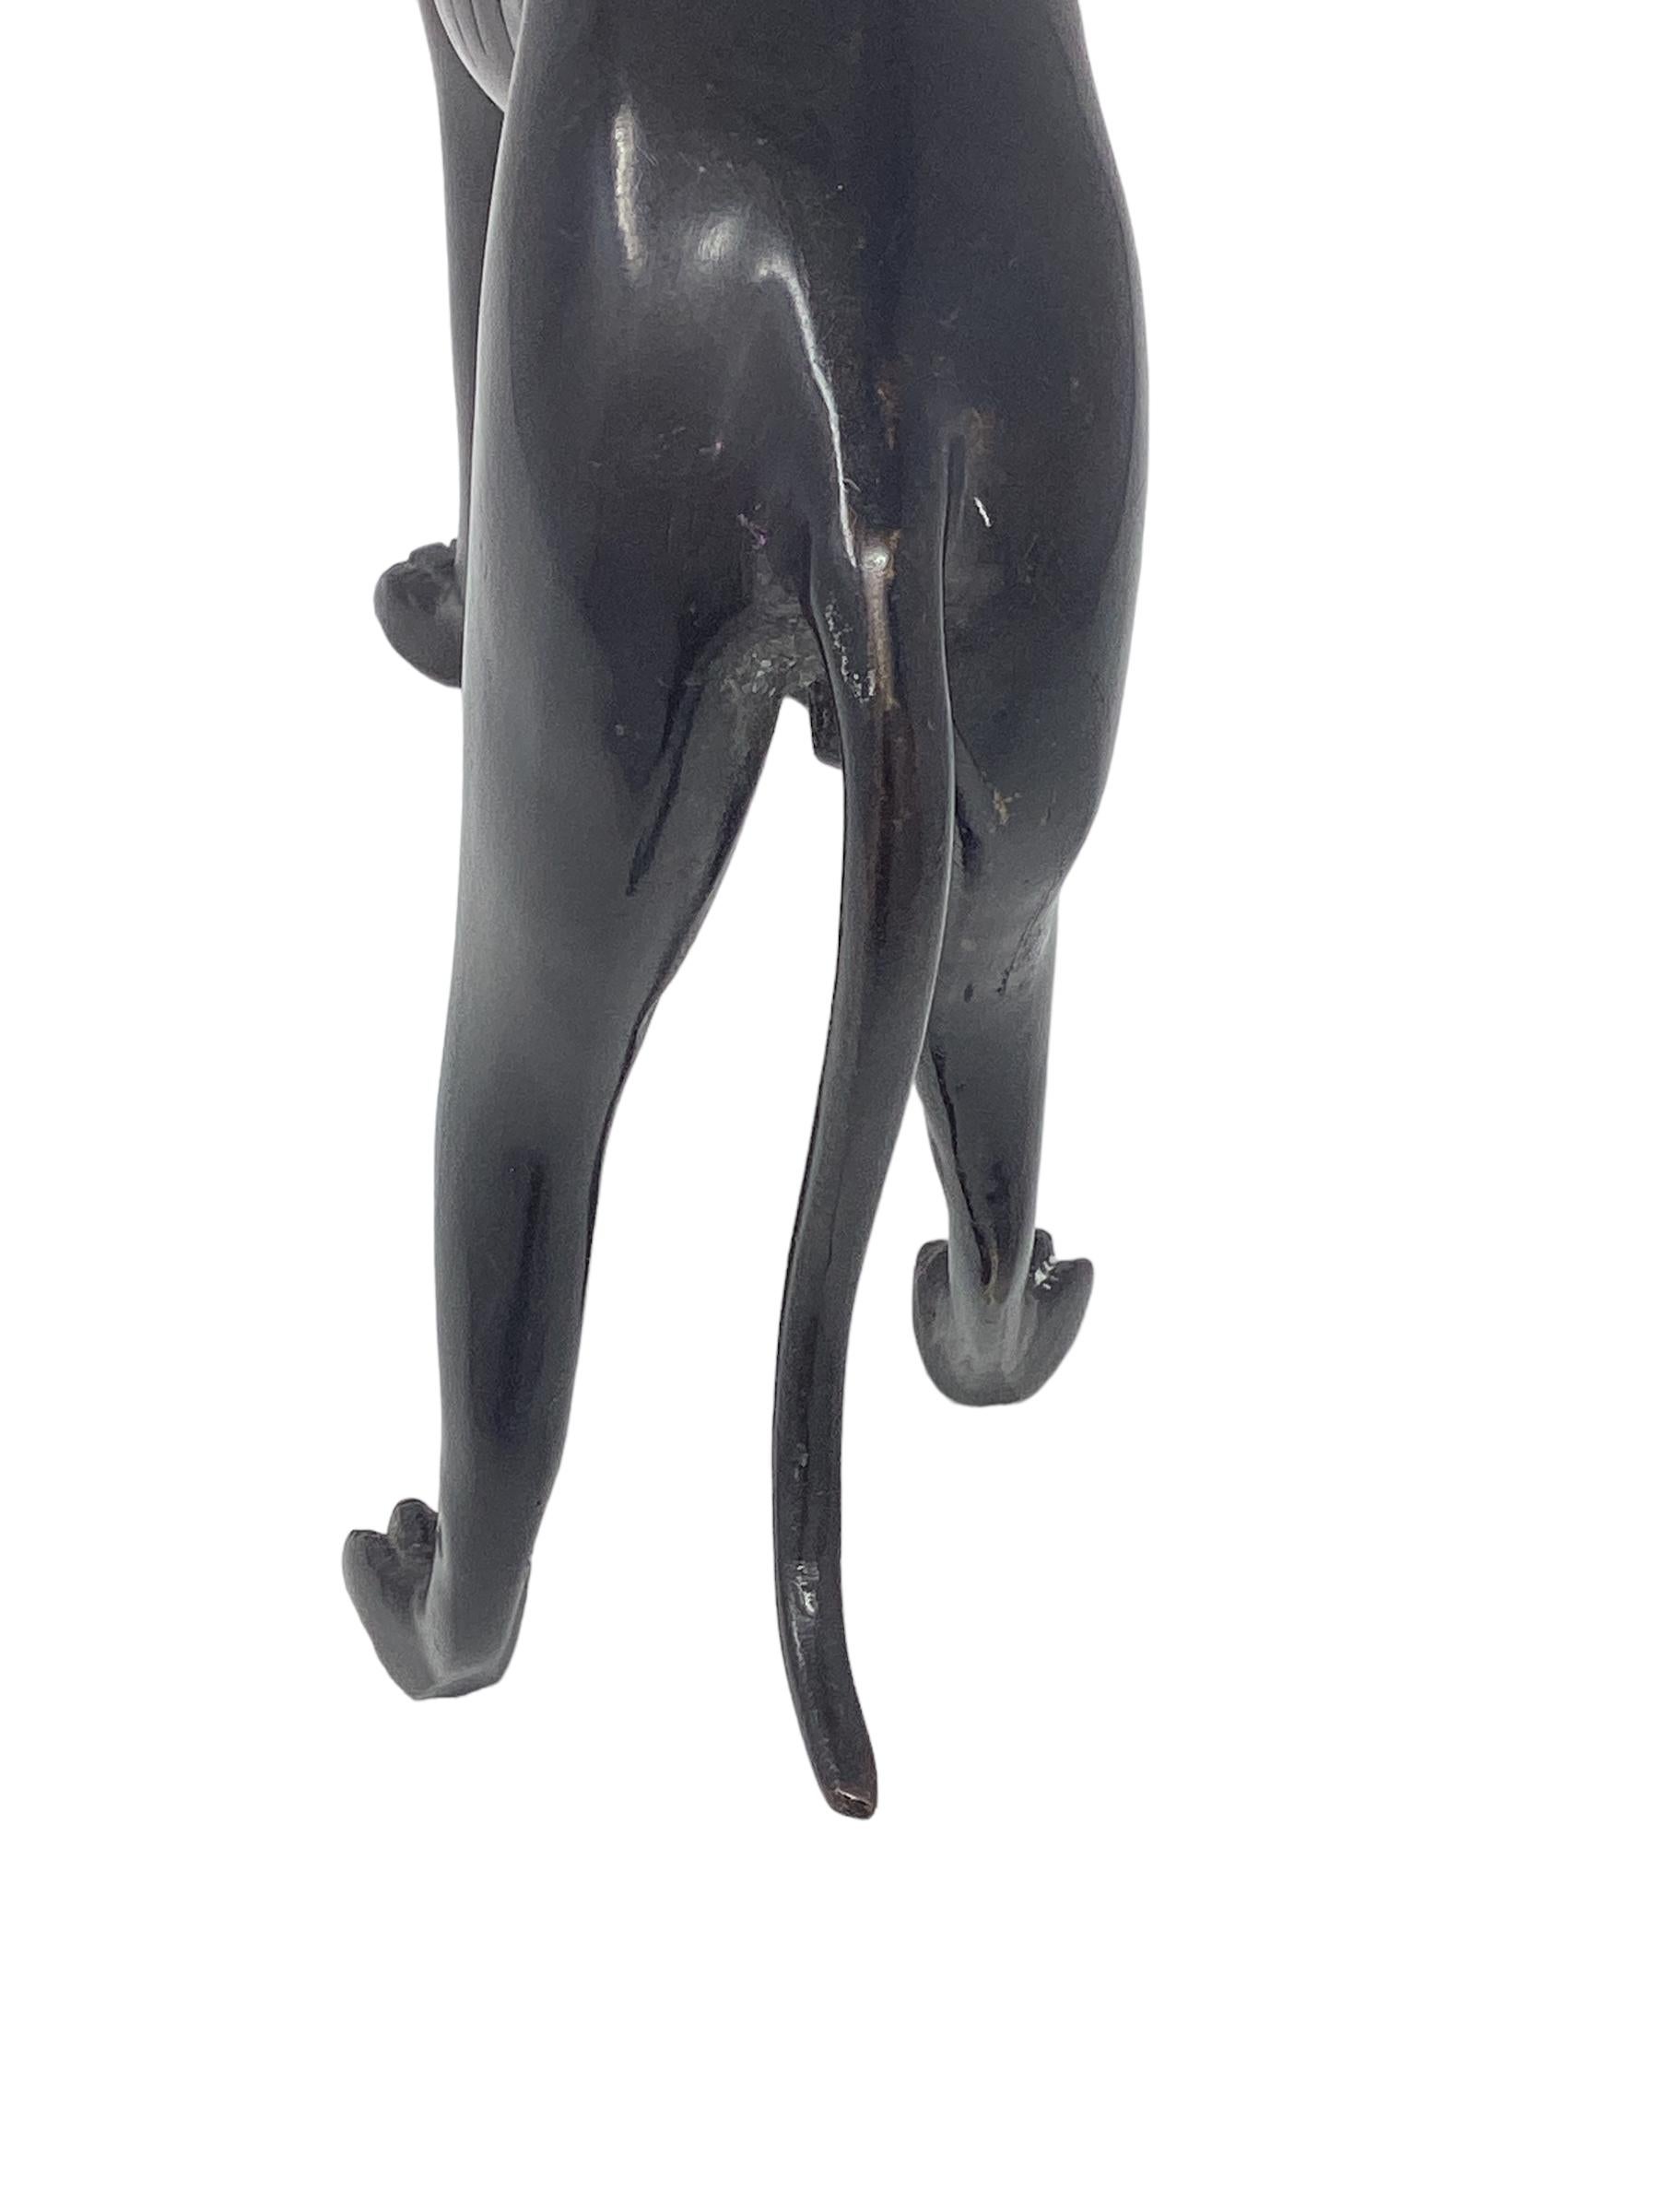 Vintage Bronze Greyhound or Whippet  In Good Condition For Sale In Chapel Hill, NC